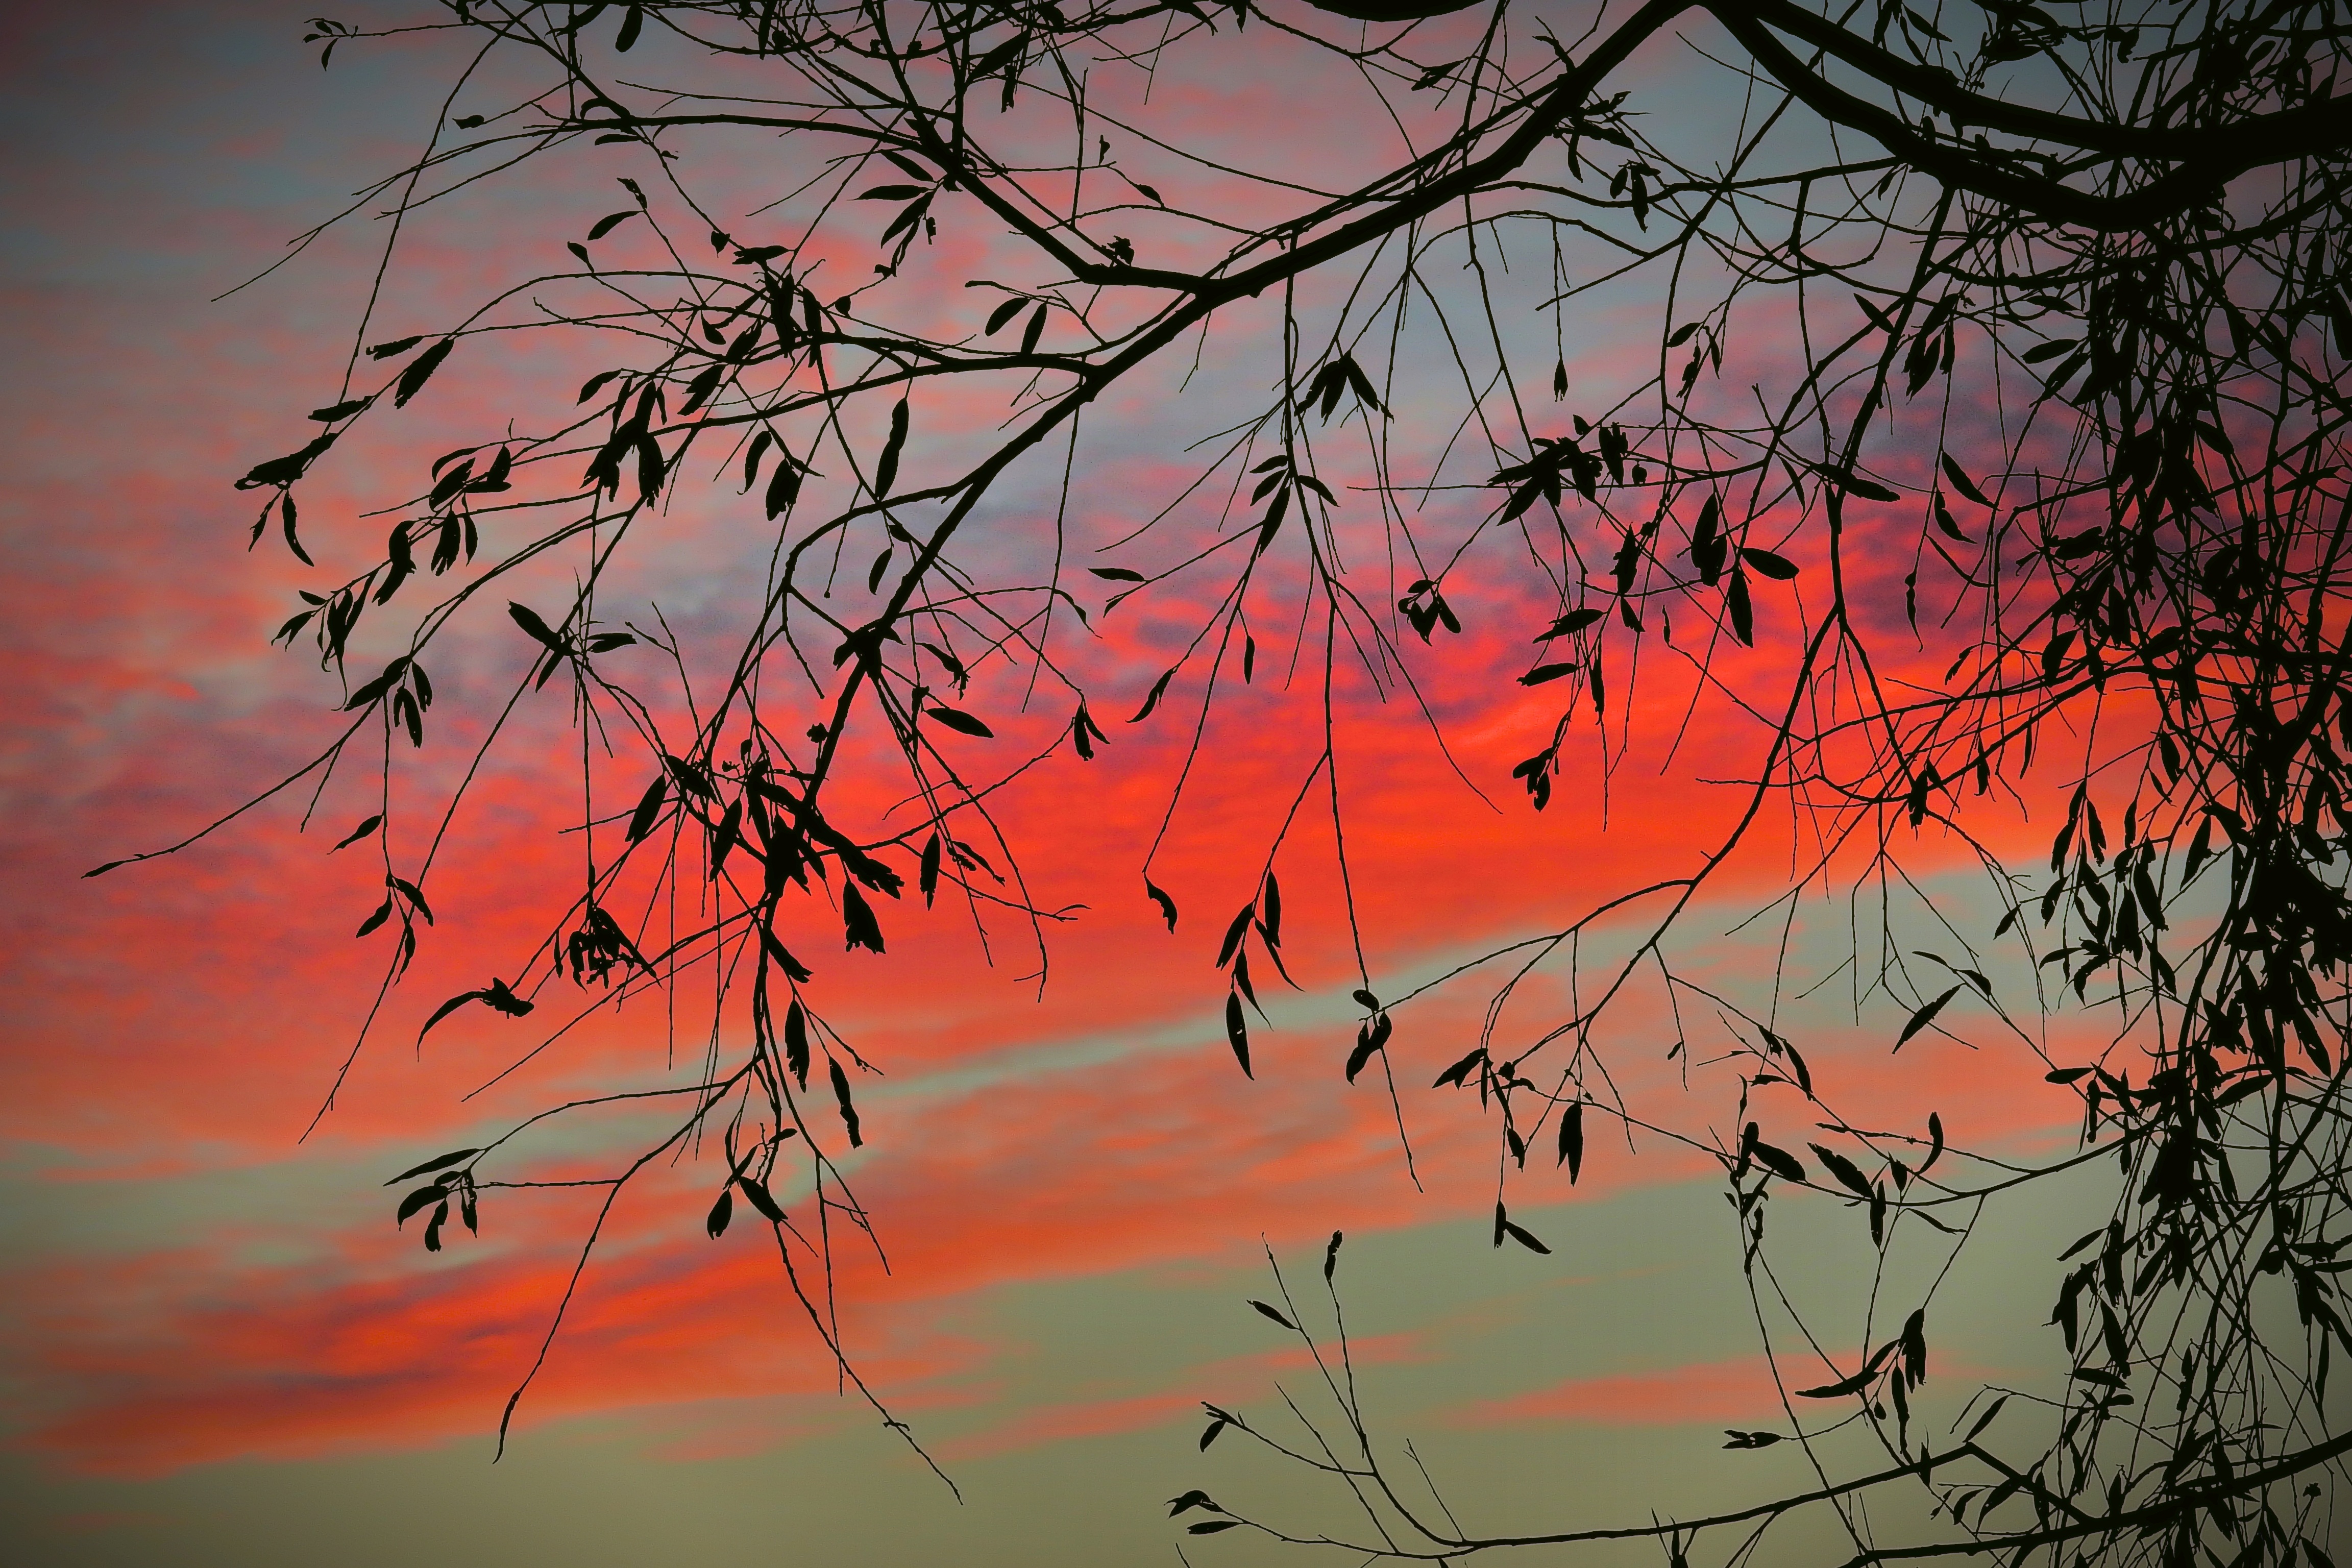 leaves, nature, sunset, sky, twilight, clouds, wood, tree, branch, dusk